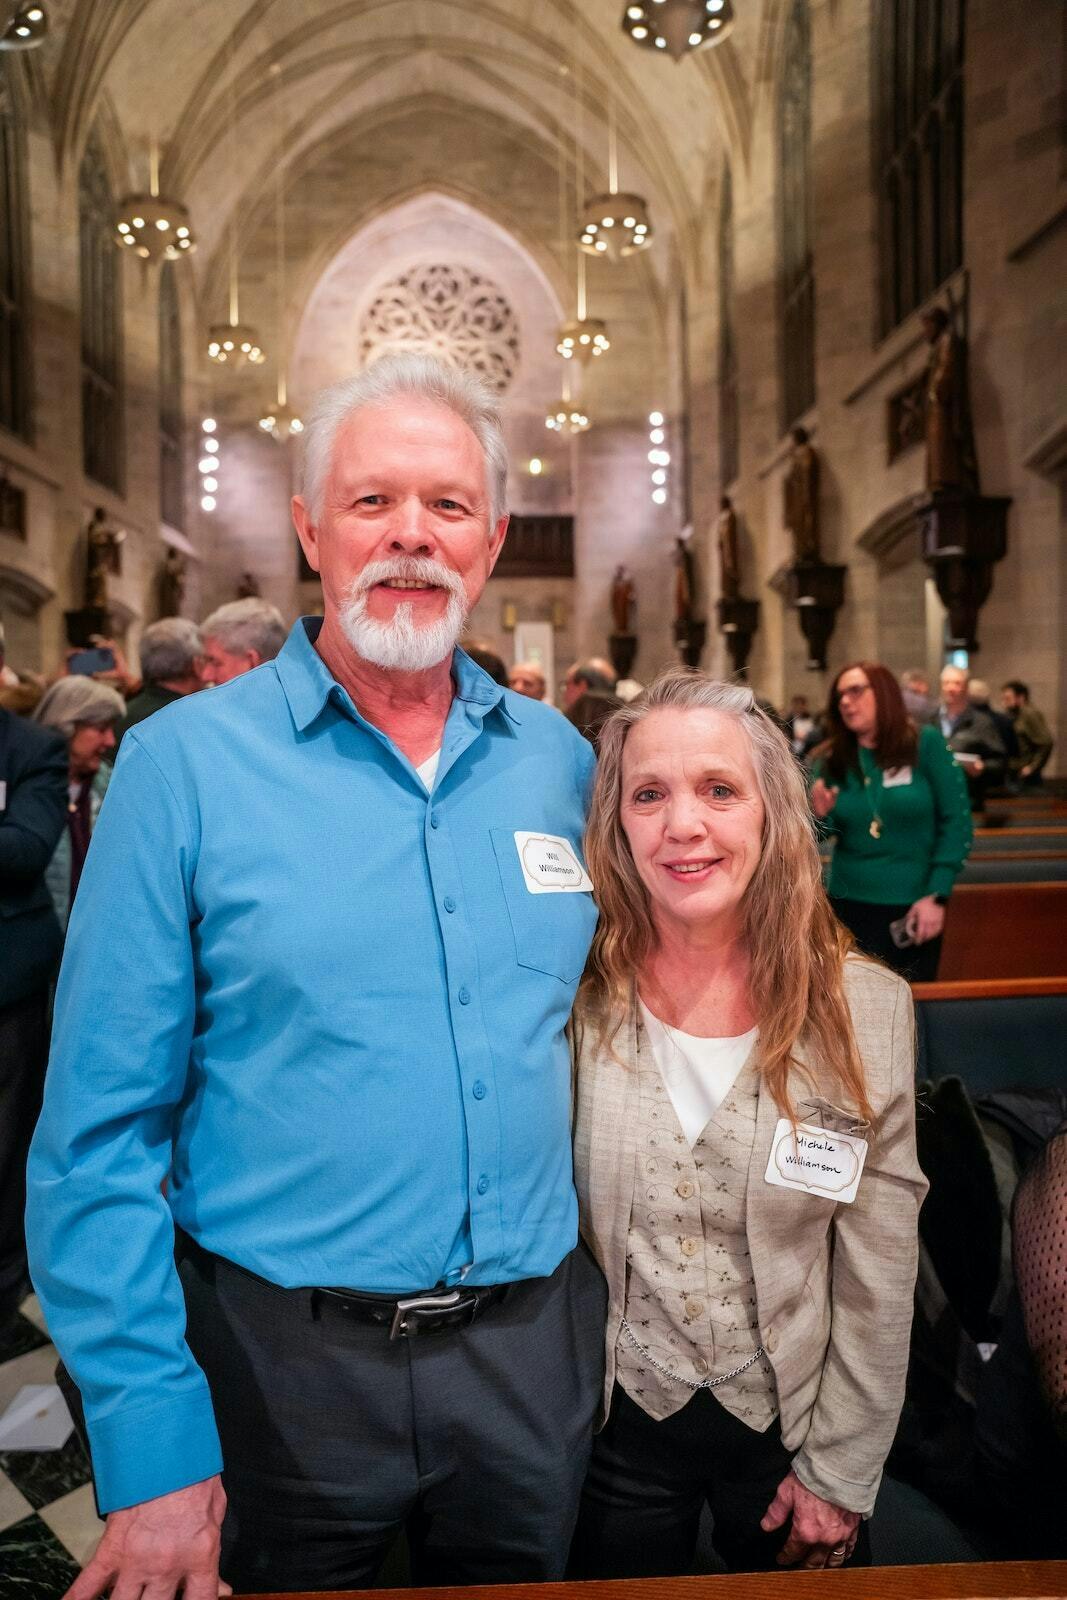 Will Williamson, the craftsman who installed the statue pedestals, is pictured with his wife, Michele, before the dedication ceremony at the Cathedral of the Most Blessed Sacrament.